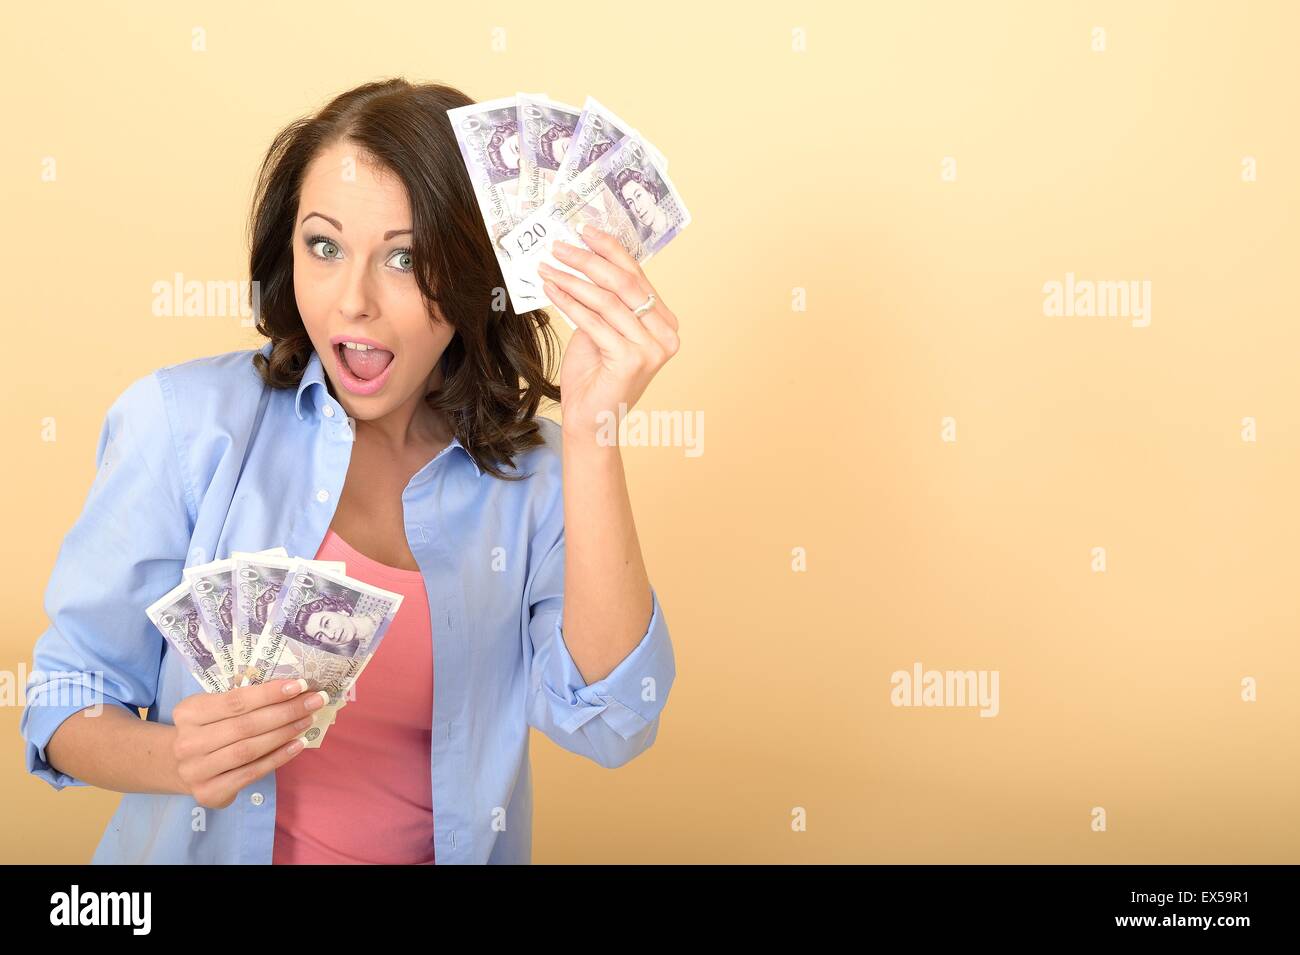 Attractive Young Happy Woman Holding A Handful Of British Twenty Pound Notes Money Or Cash Looking Pleased and Delighted Sitting on The Floor Alone Stock Photo